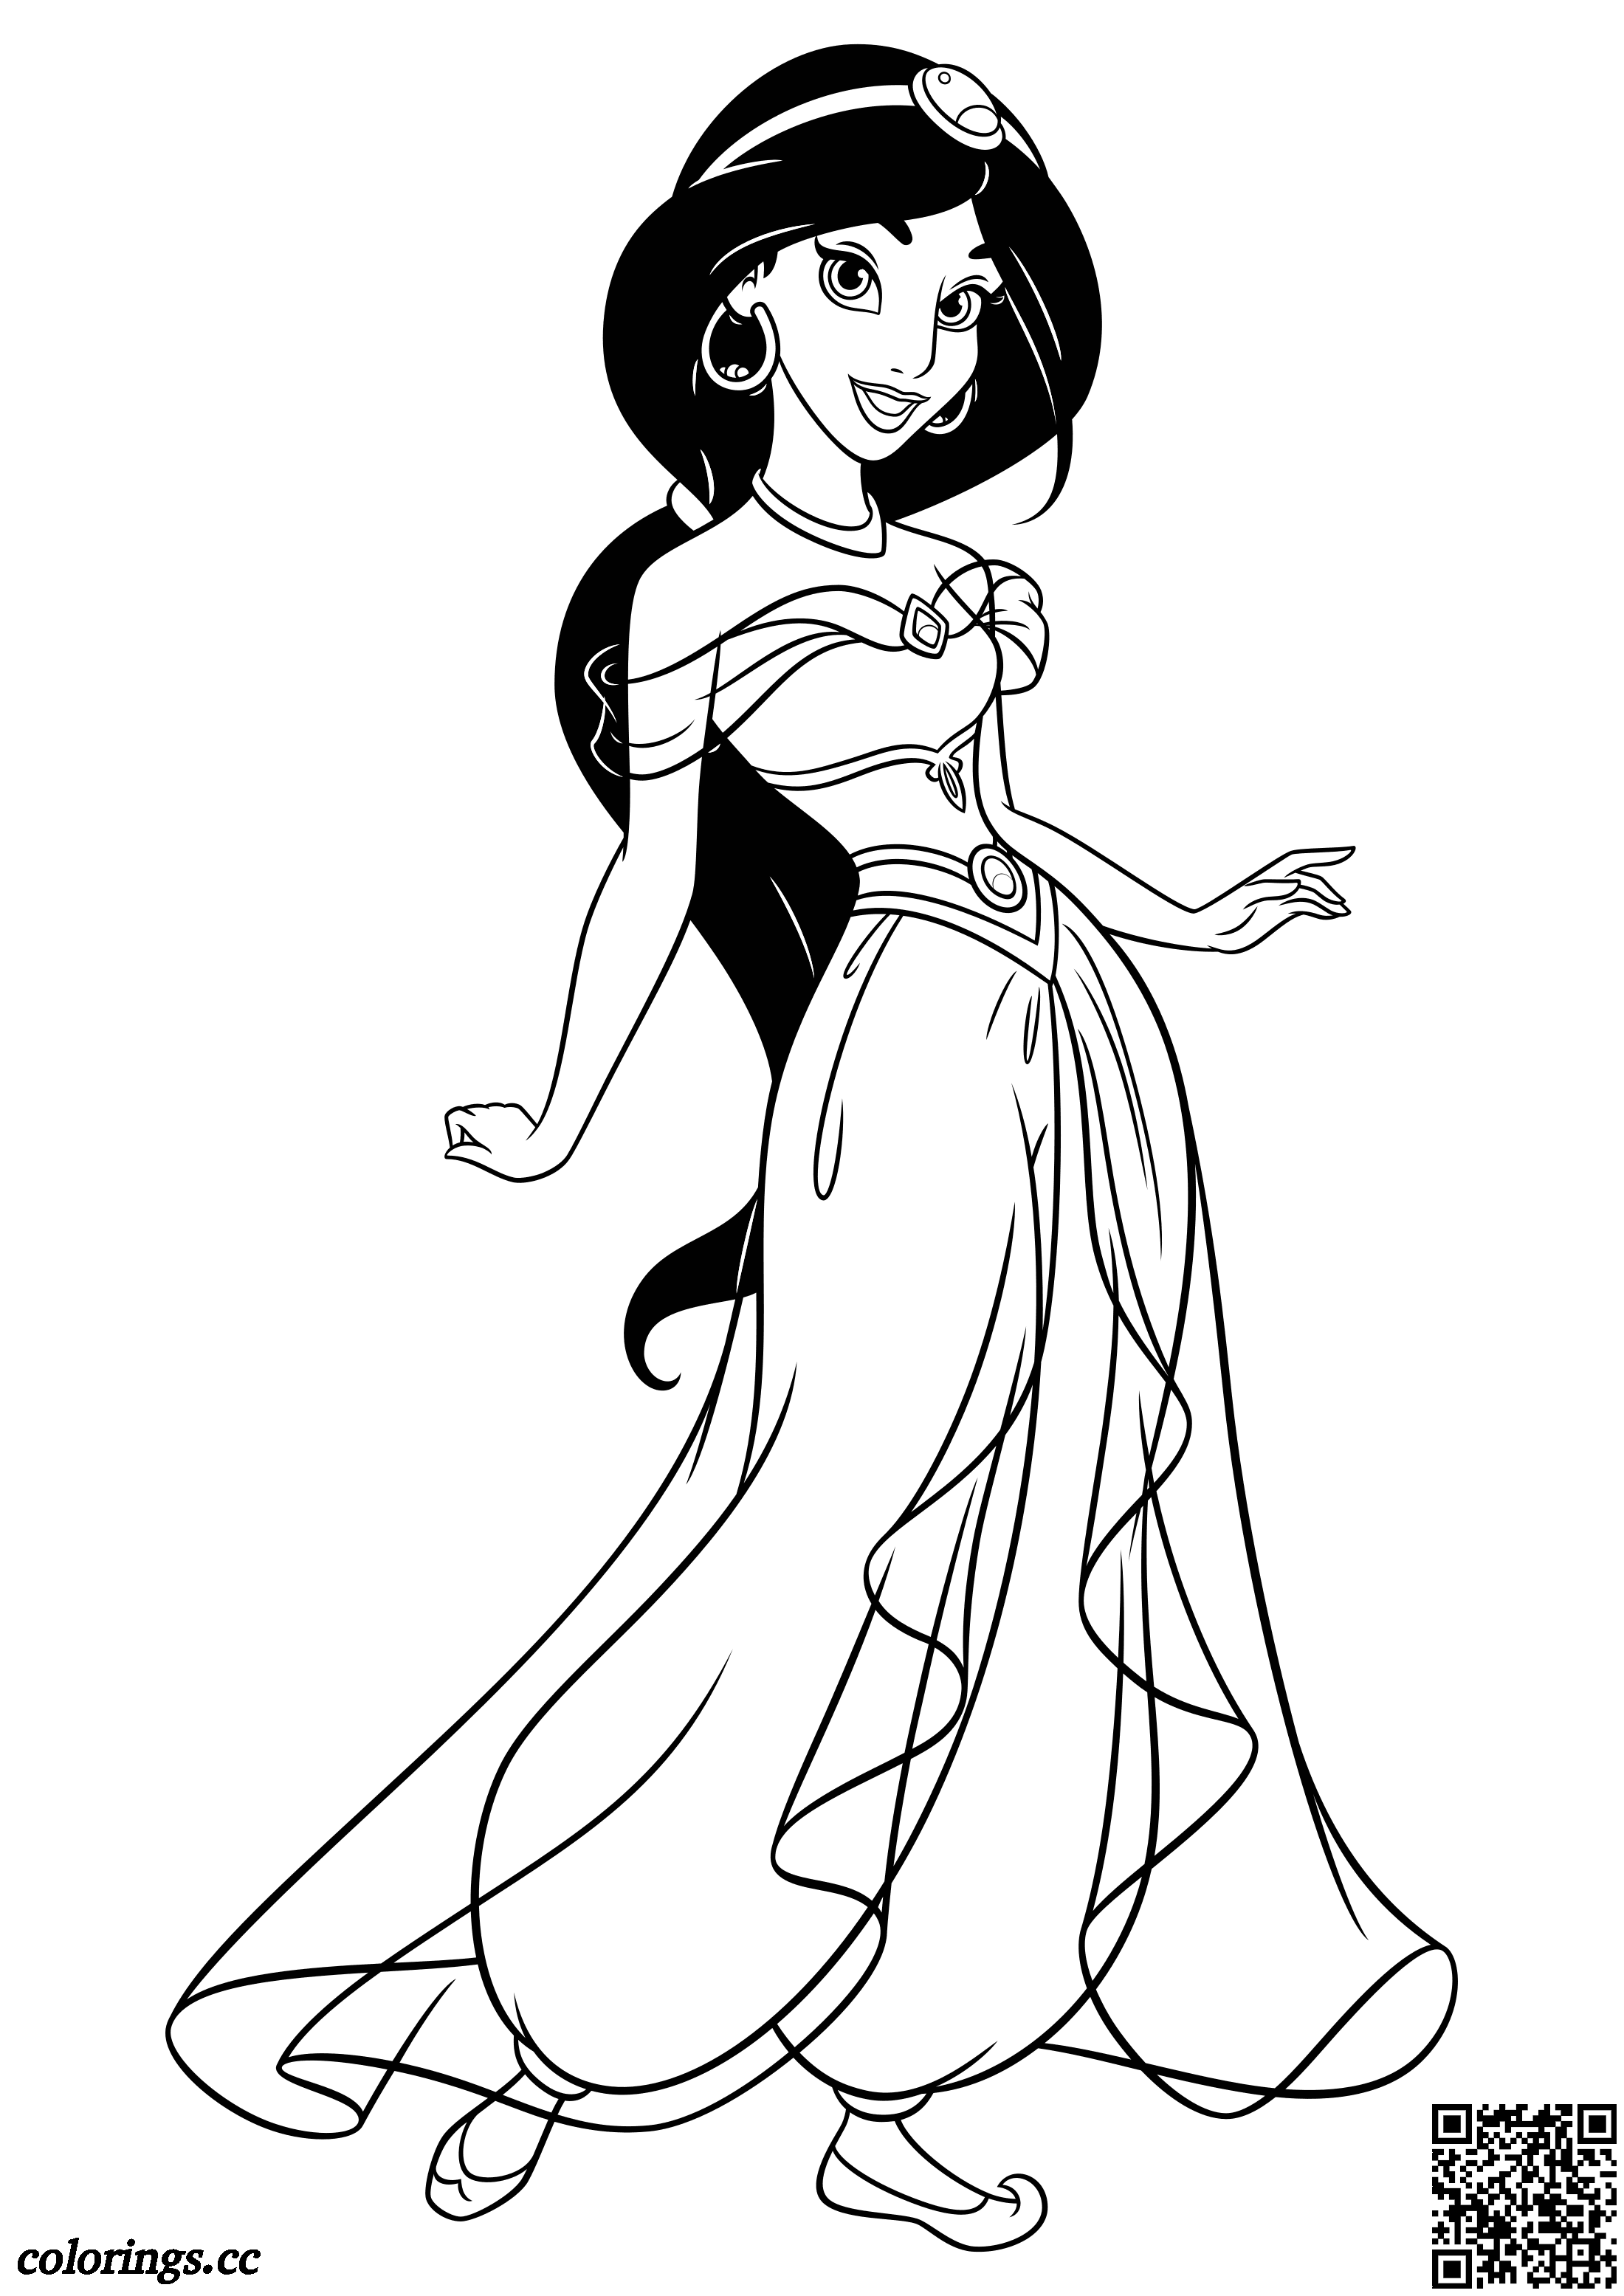 Jasmine coloring pages, Disney princesses coloring pages ...